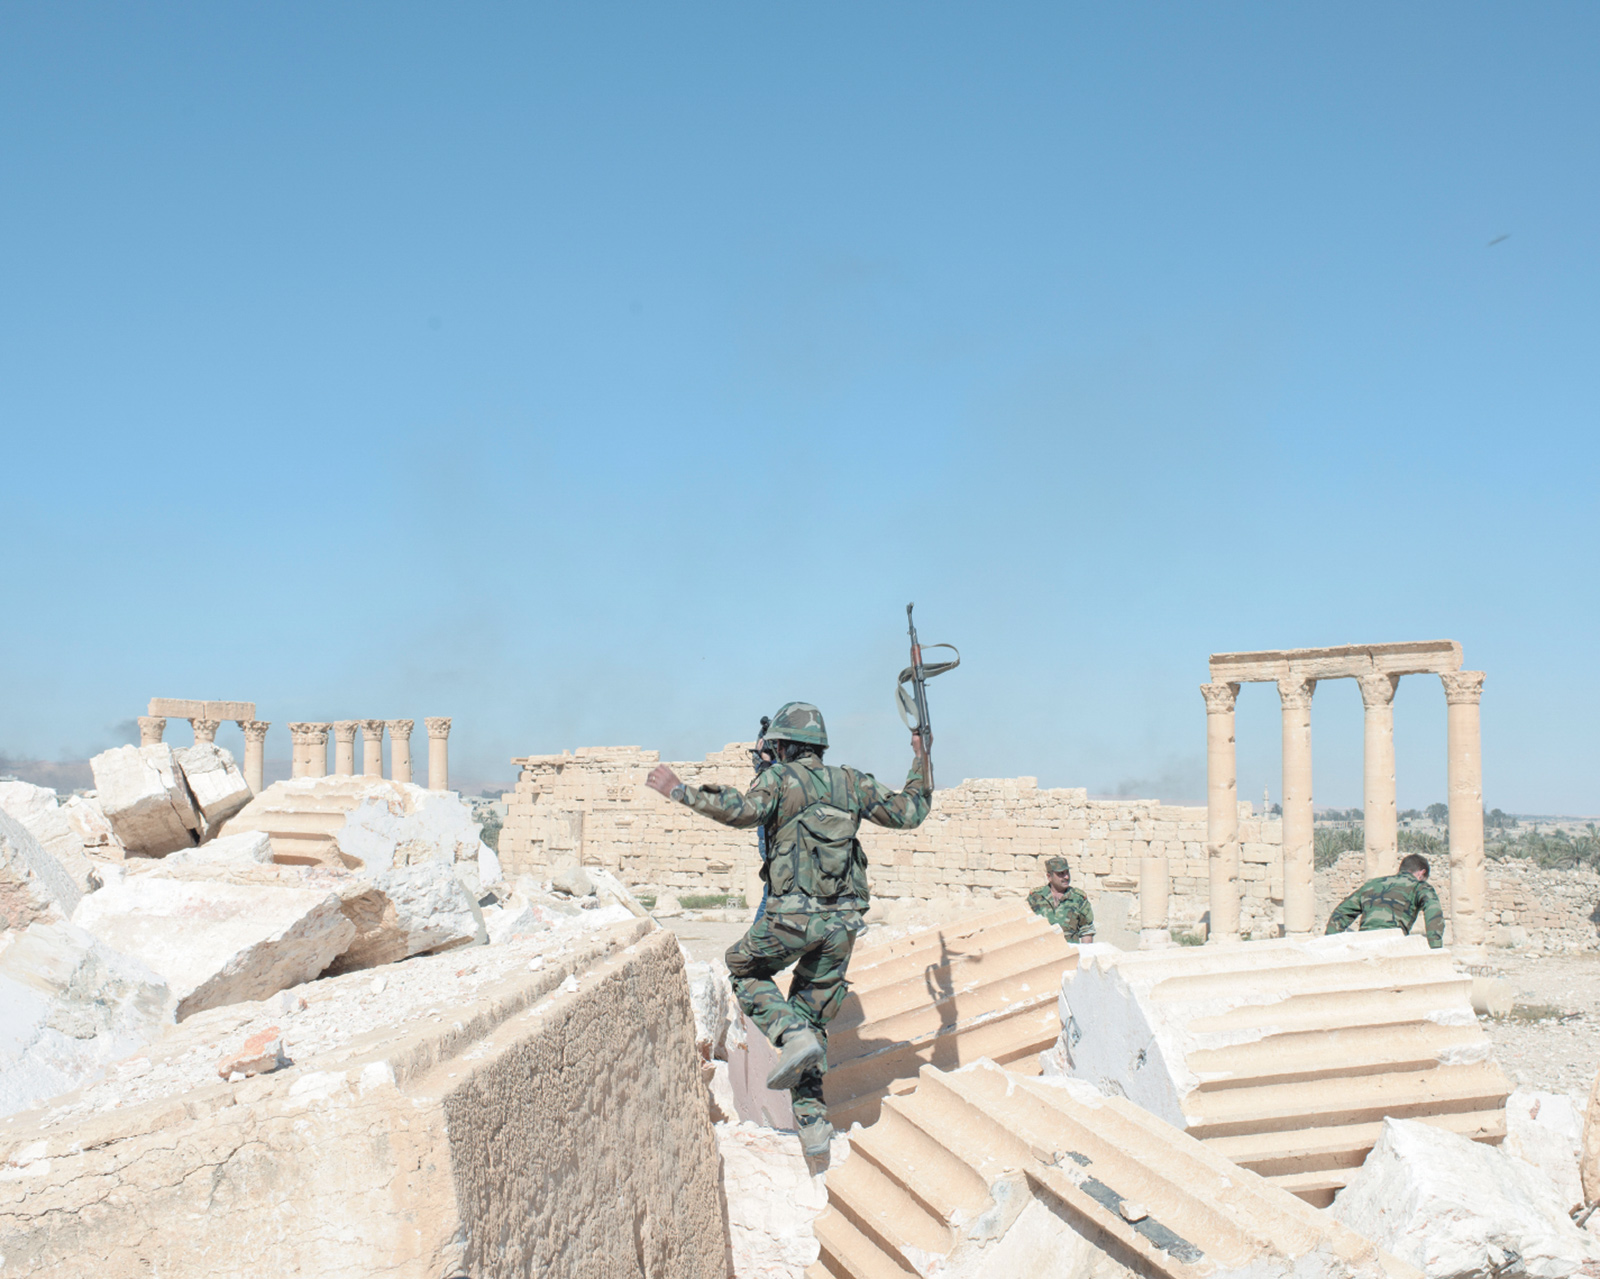 Syrian Army soldiers at the ruins of the Temple of Bel after retaking the destroyed ancient city of Palmyra from Islamic State militants, April 2016